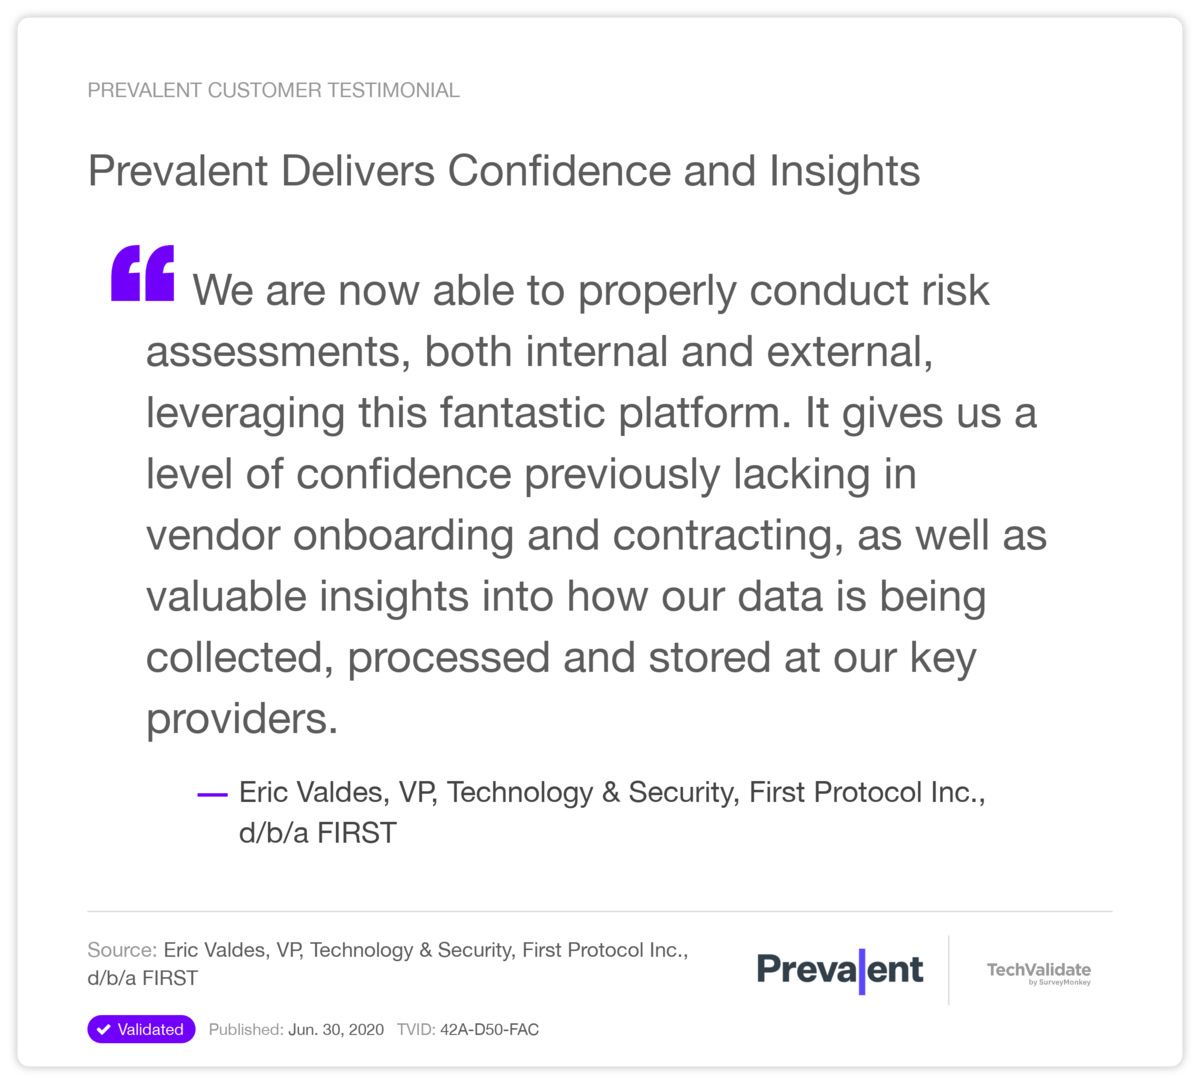 Prevalent Delivers Confidence and Insights